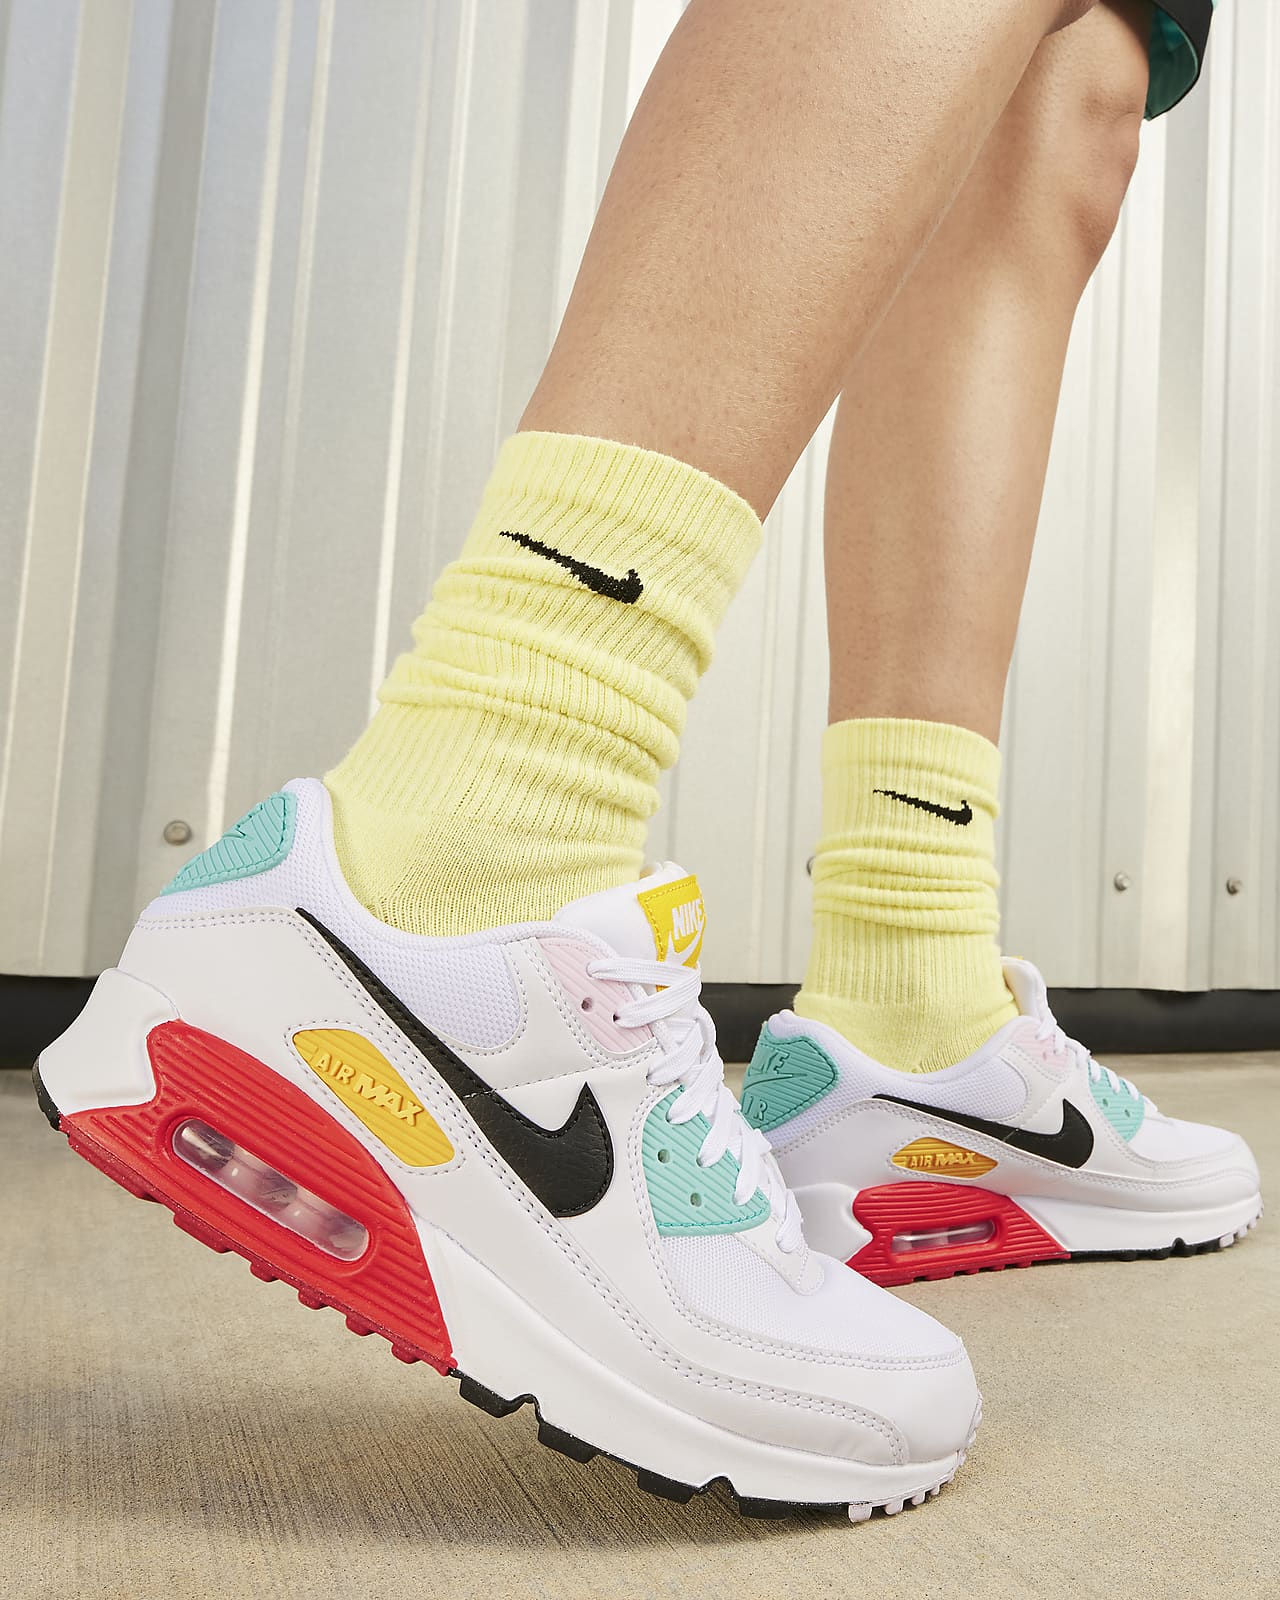 Nike Air Max 90 Women's Sneakers for sale